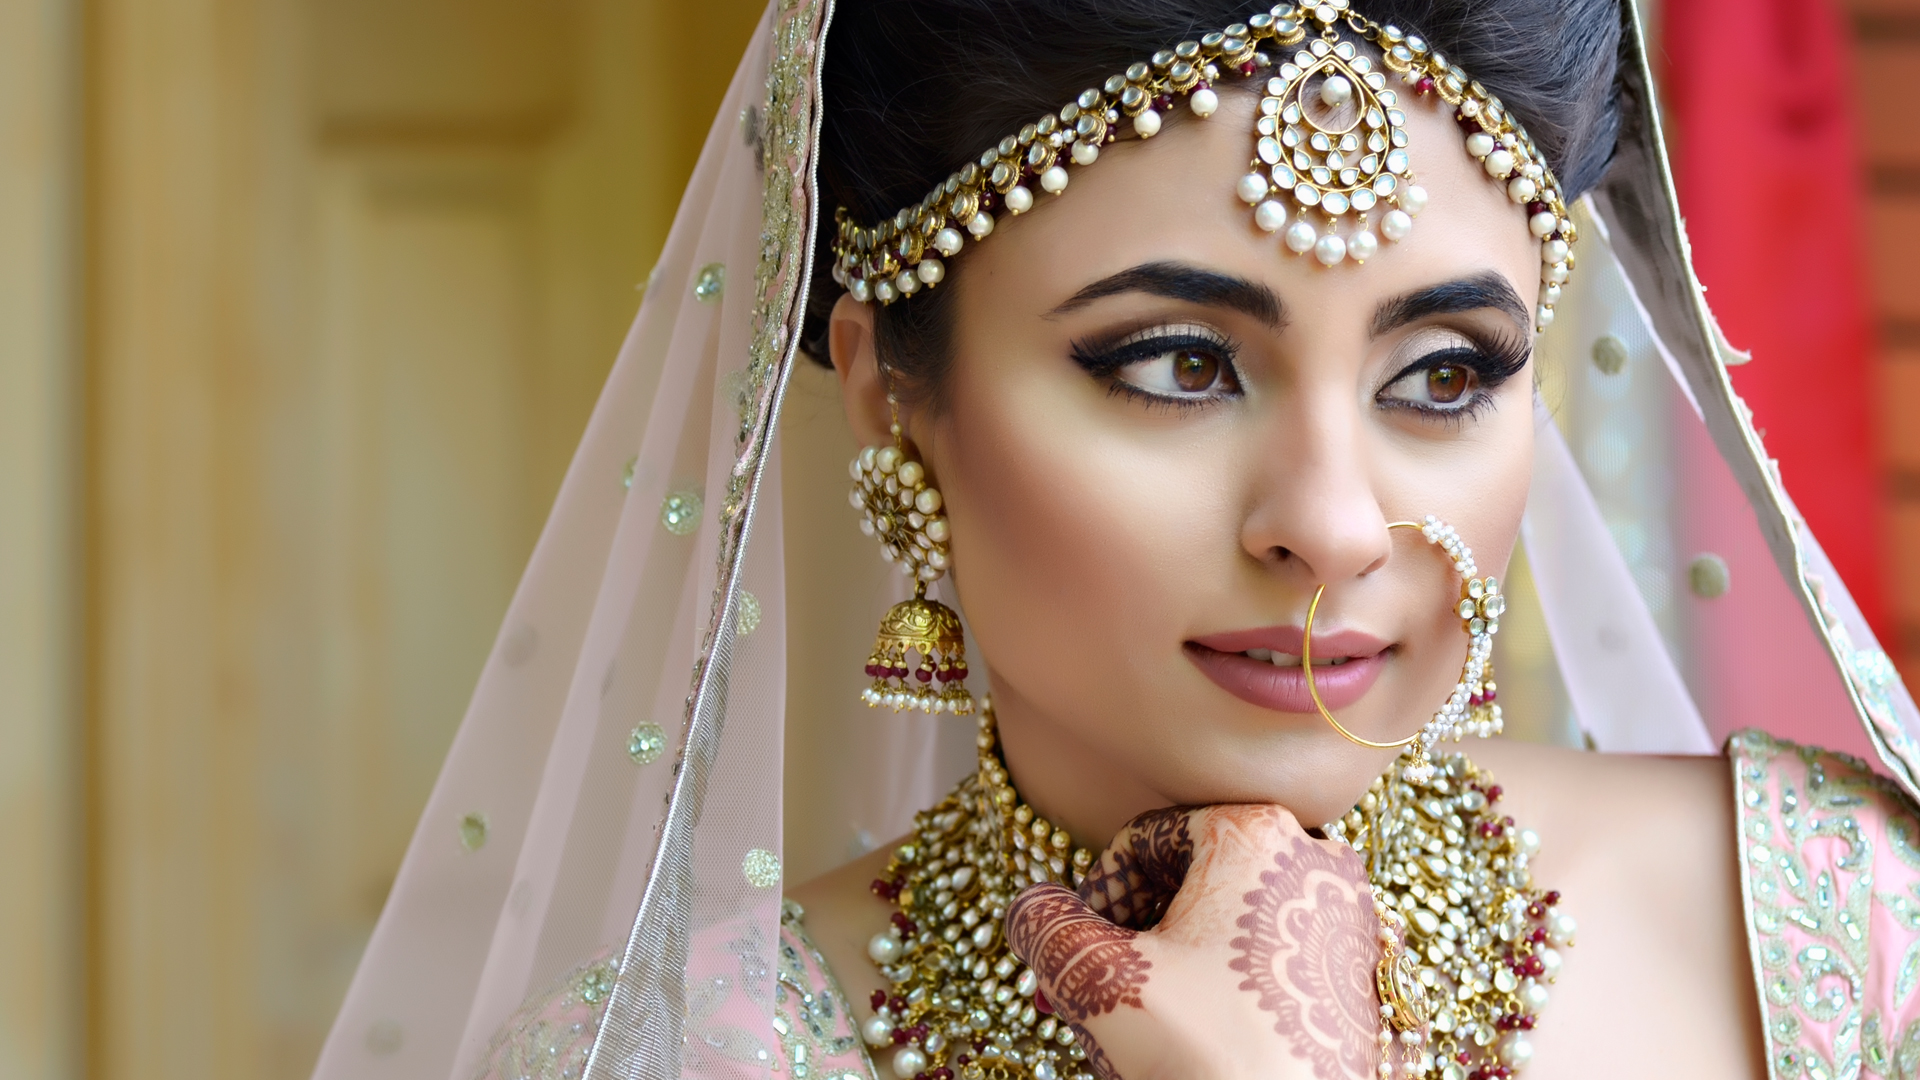 4 Tips If You’re Doing Your Own Wedding-Day Makeup